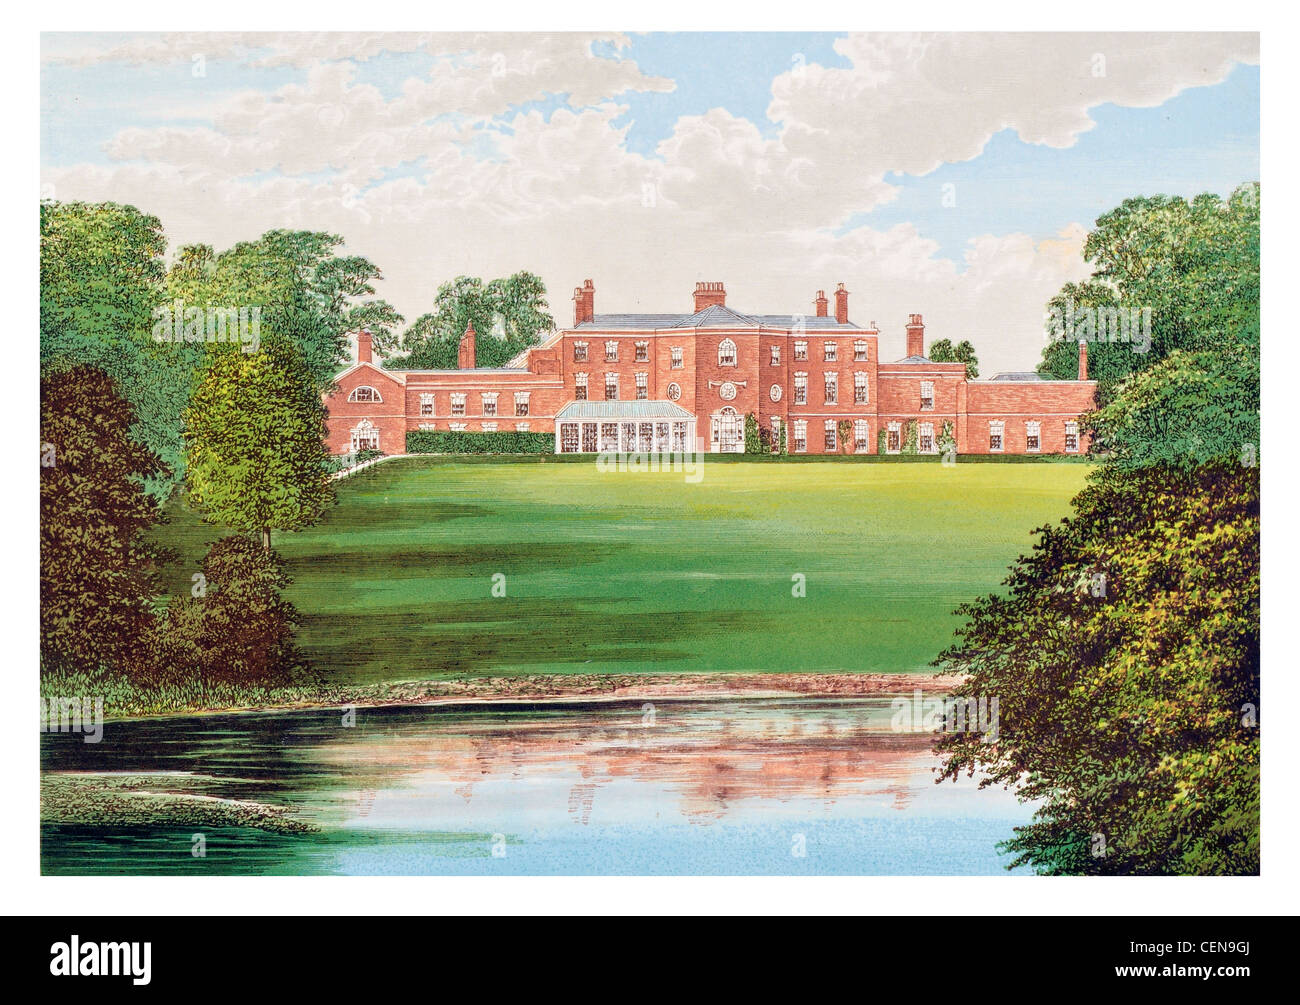 Lawton Hall country house Cheshire England hotel school Grade II listed building UK Lake Pond Stock Photo